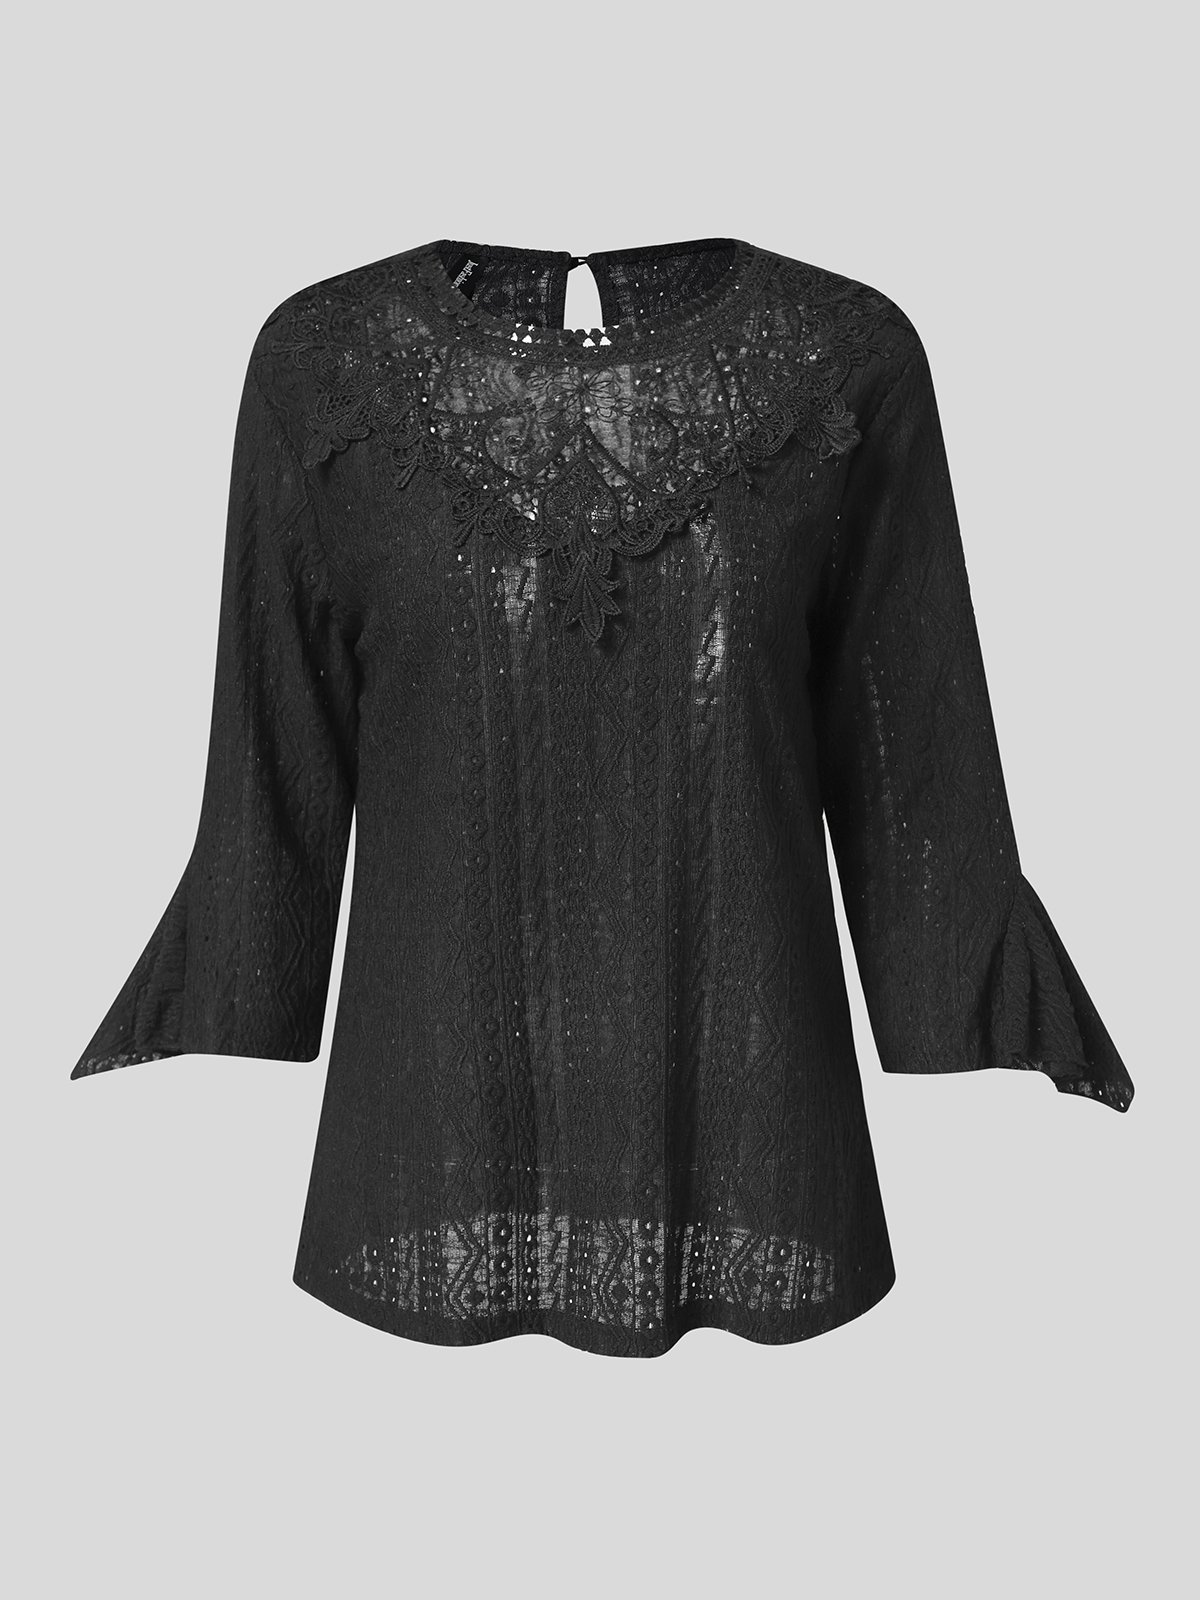 Crew Neck Lace Casual Blouse